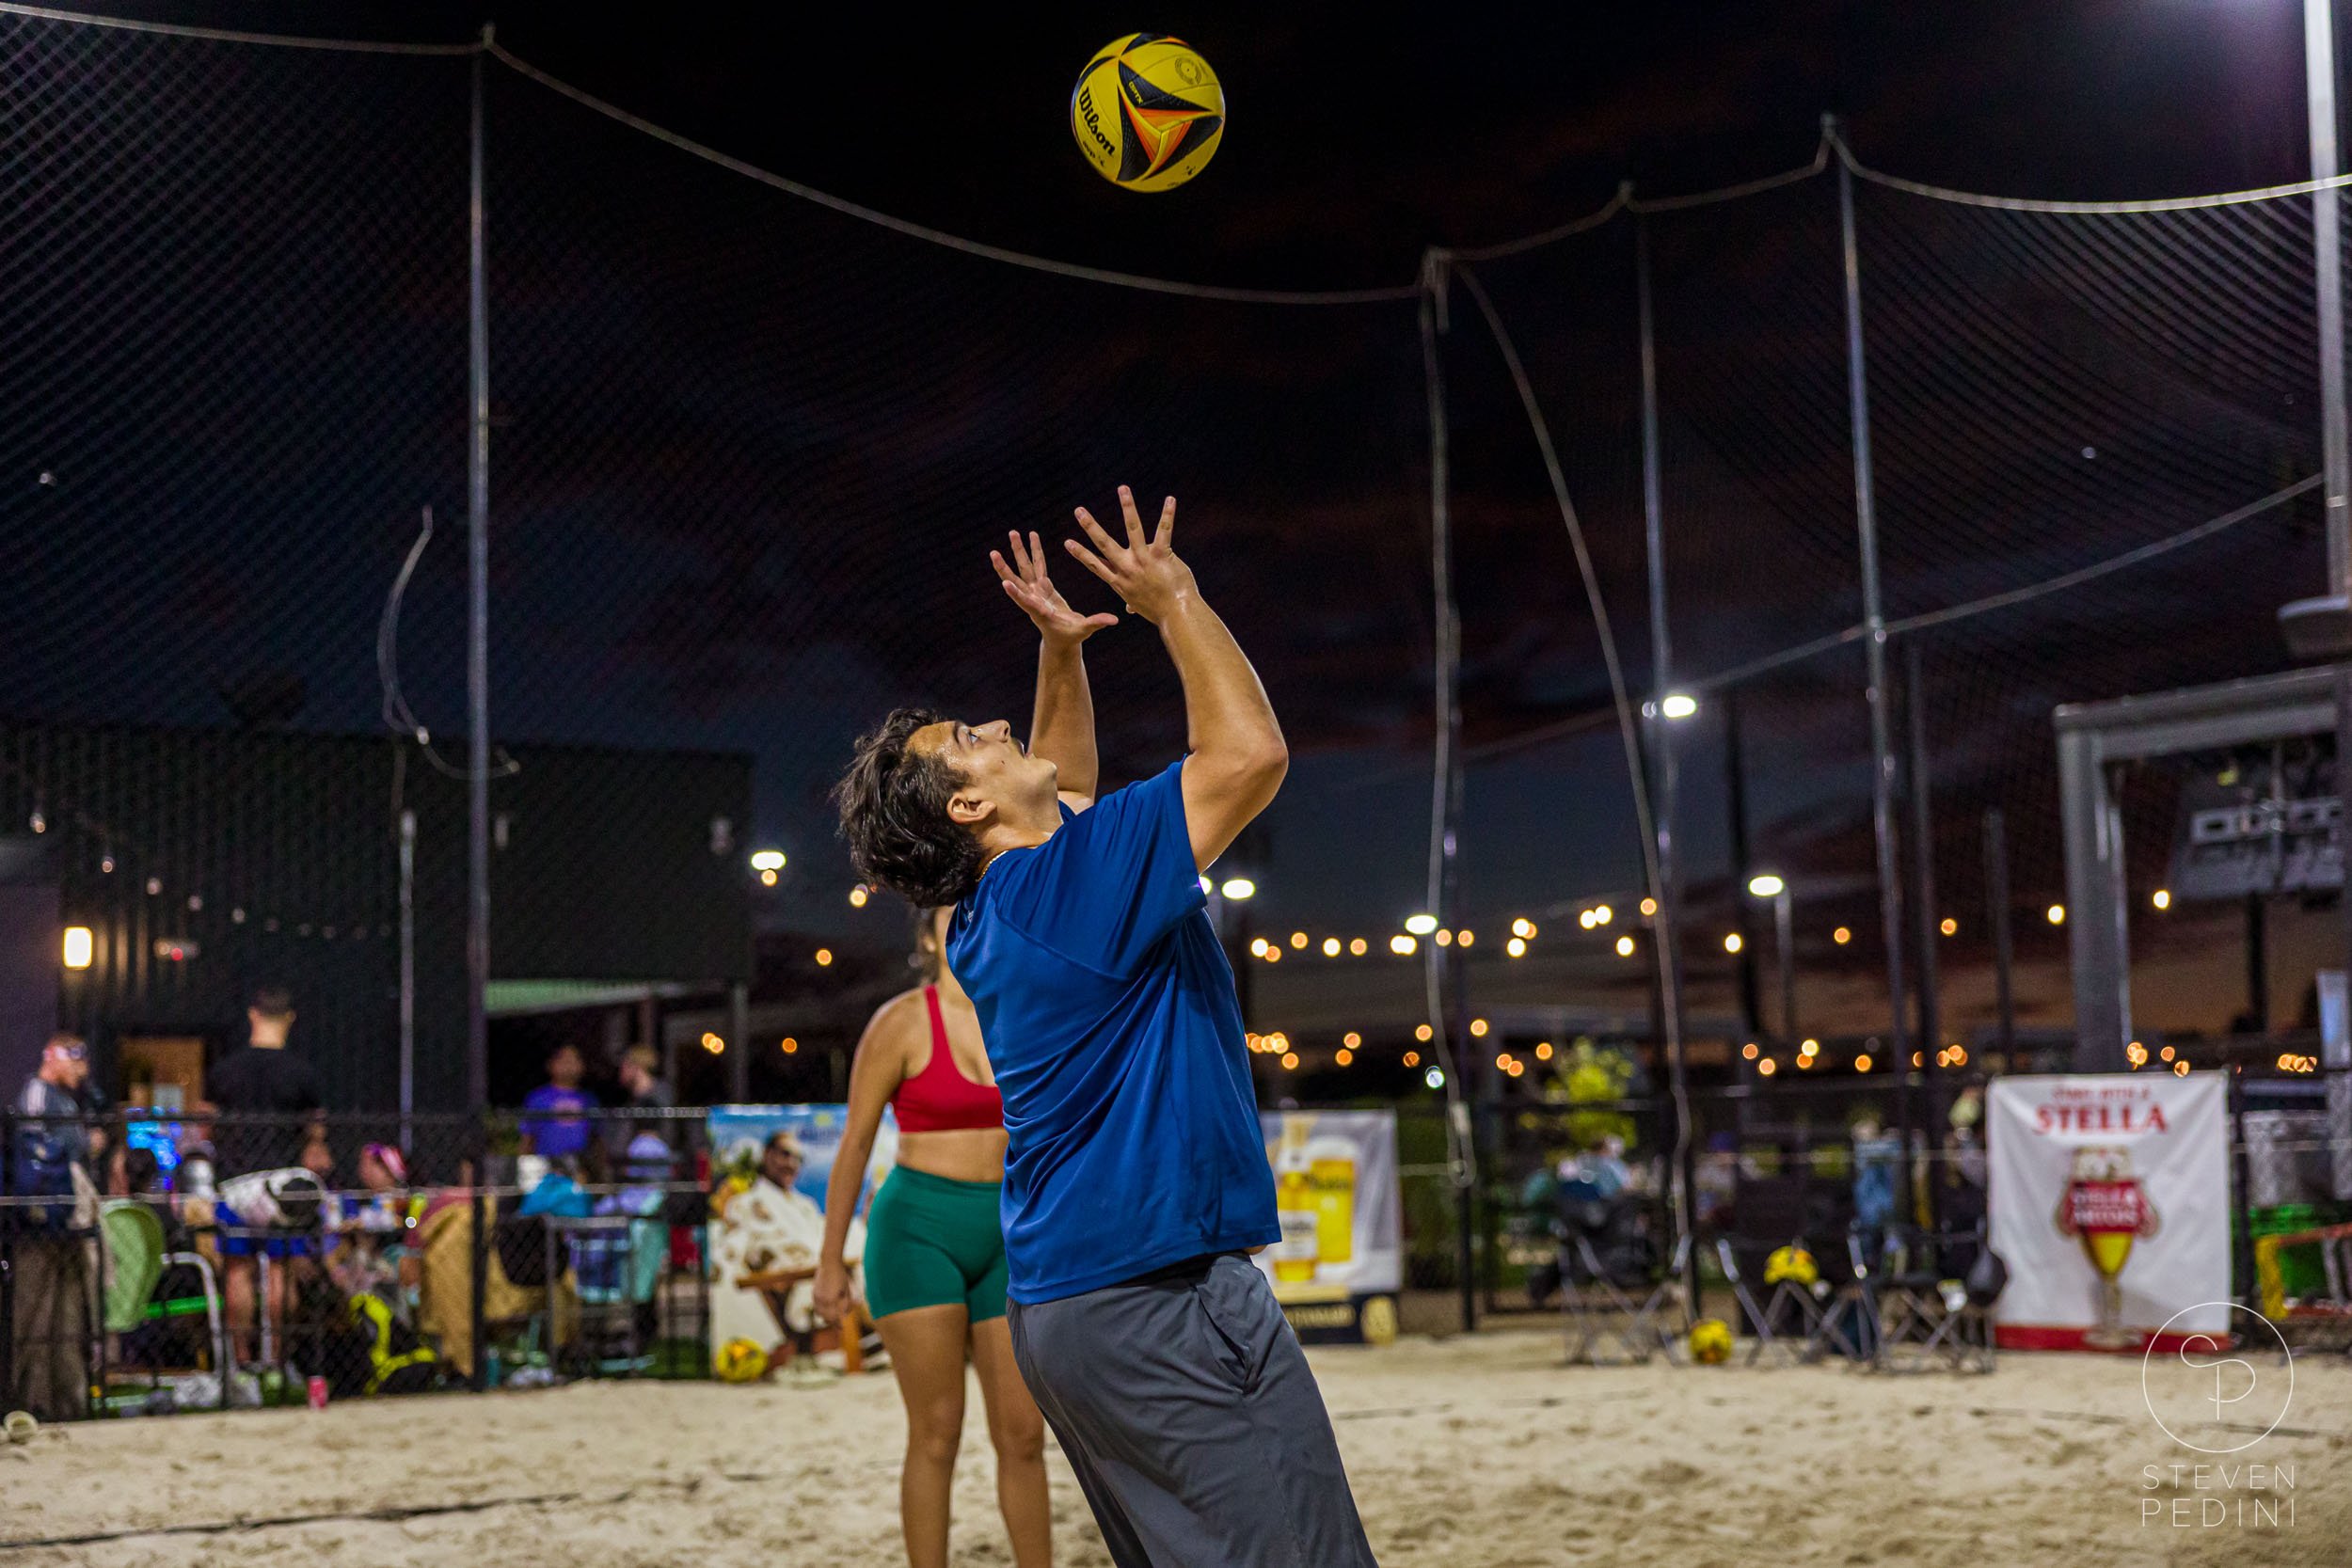 Steven Pedini Photography - Bumpy Pickle - Sand Volleyball - Houston TX - World Cup of Volleyball - 00383.jpg